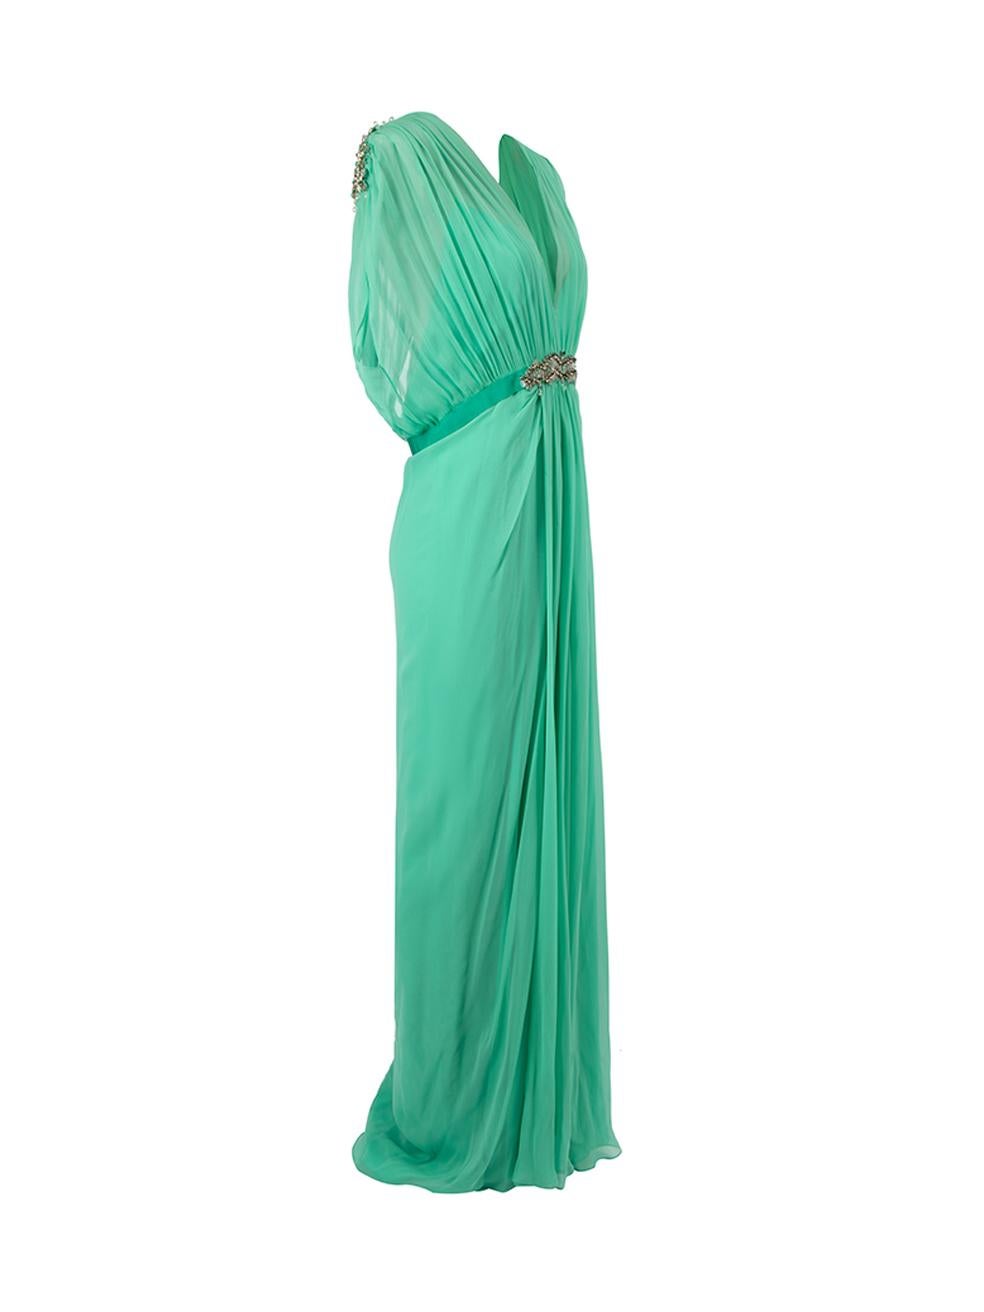 CONDITION is Never worn, with tags. No visible wear to dress is evident on this used Jenny Packham designer resale item.   Details  Mint Silk Maxi gown Plunge neckline Embellished gemstones design Slide clasp fastening with large keyhole back